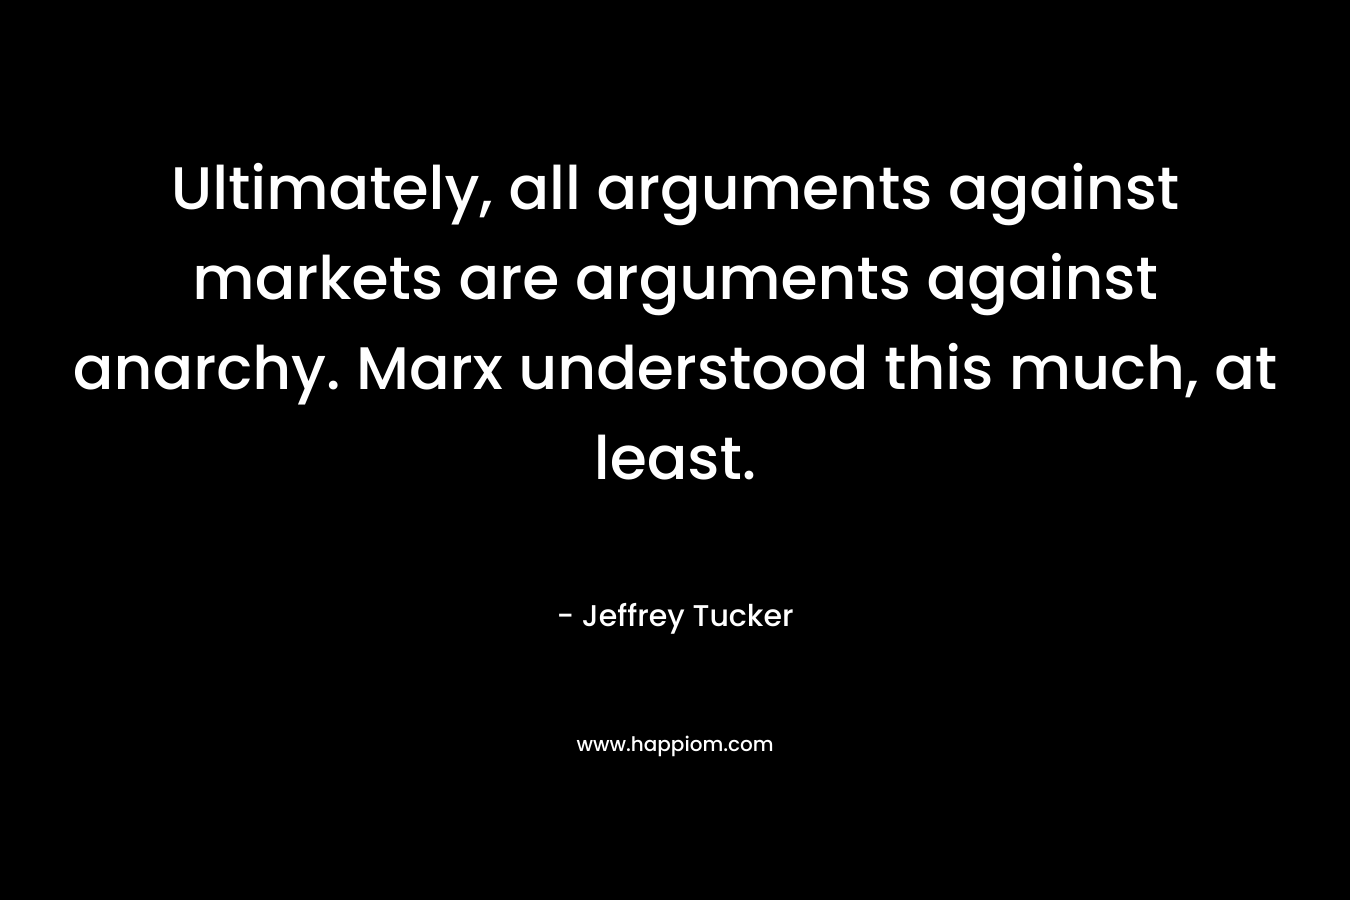 Ultimately, all arguments against markets are arguments against anarchy. Marx understood this much, at least.